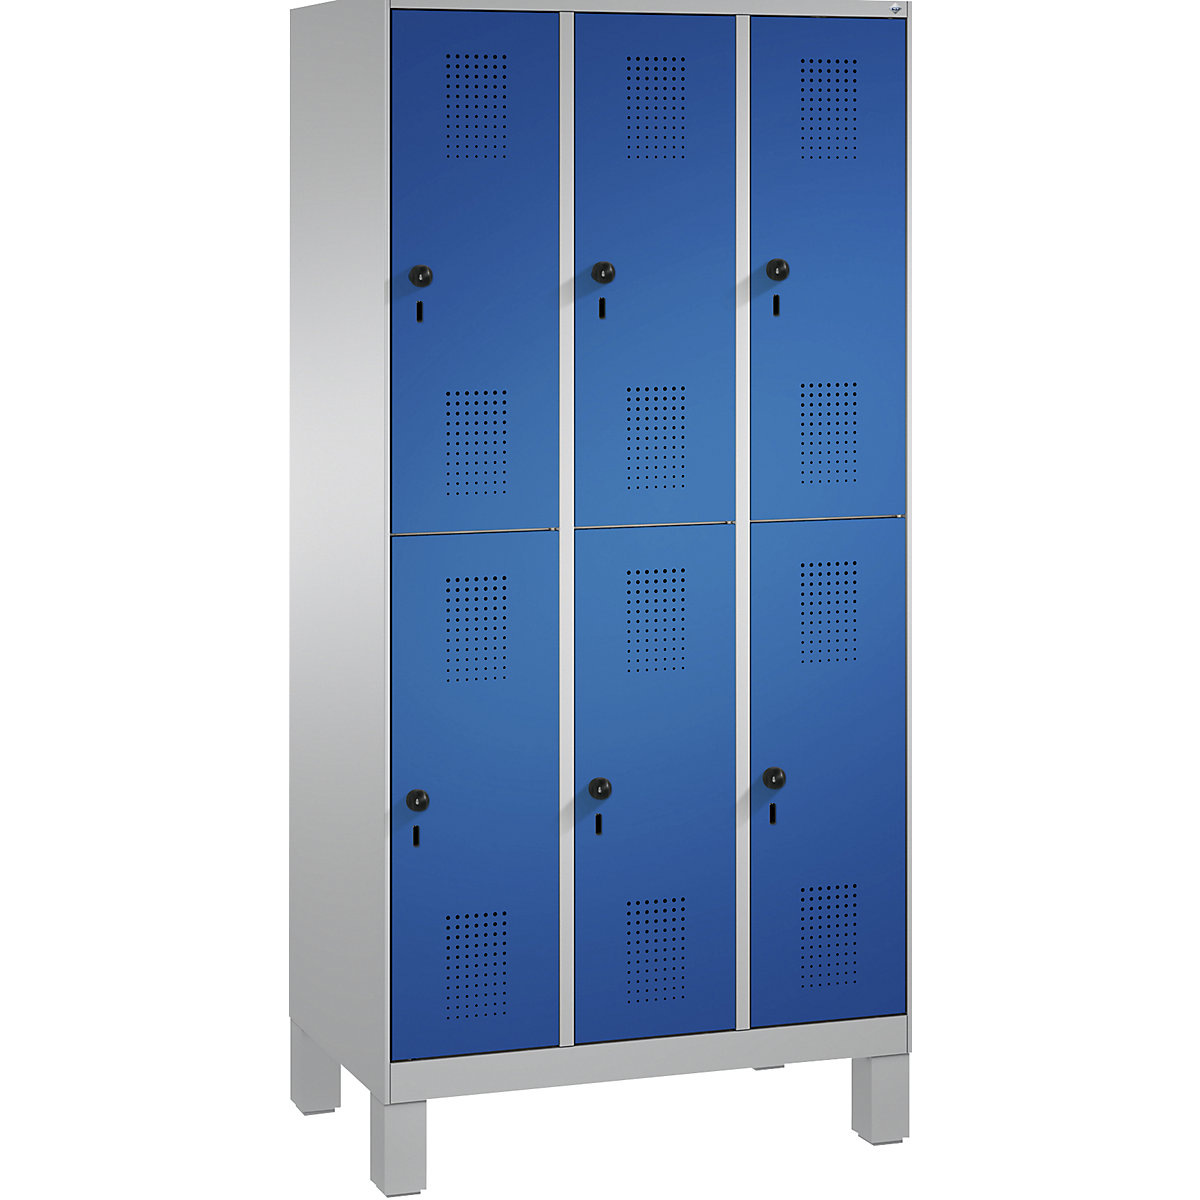 EVOLO cloakroom locker, double tier, with feet – C+P, 3 compartments, 2 shelf compartments each, compartment width 300 mm, white aluminium / gentian blue-7